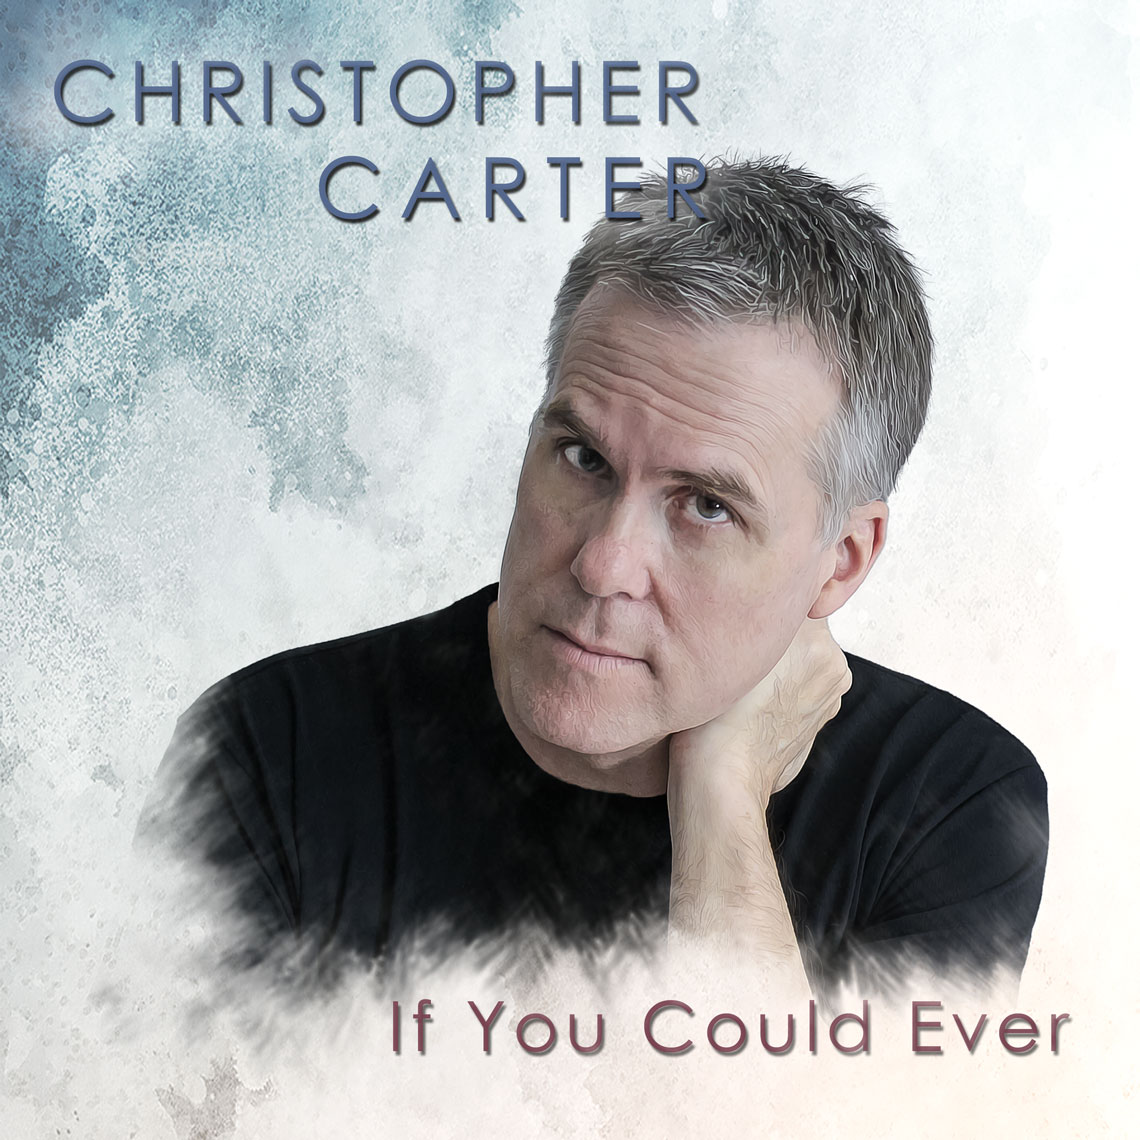 Christopher Carter on iTunes and Amazon Music